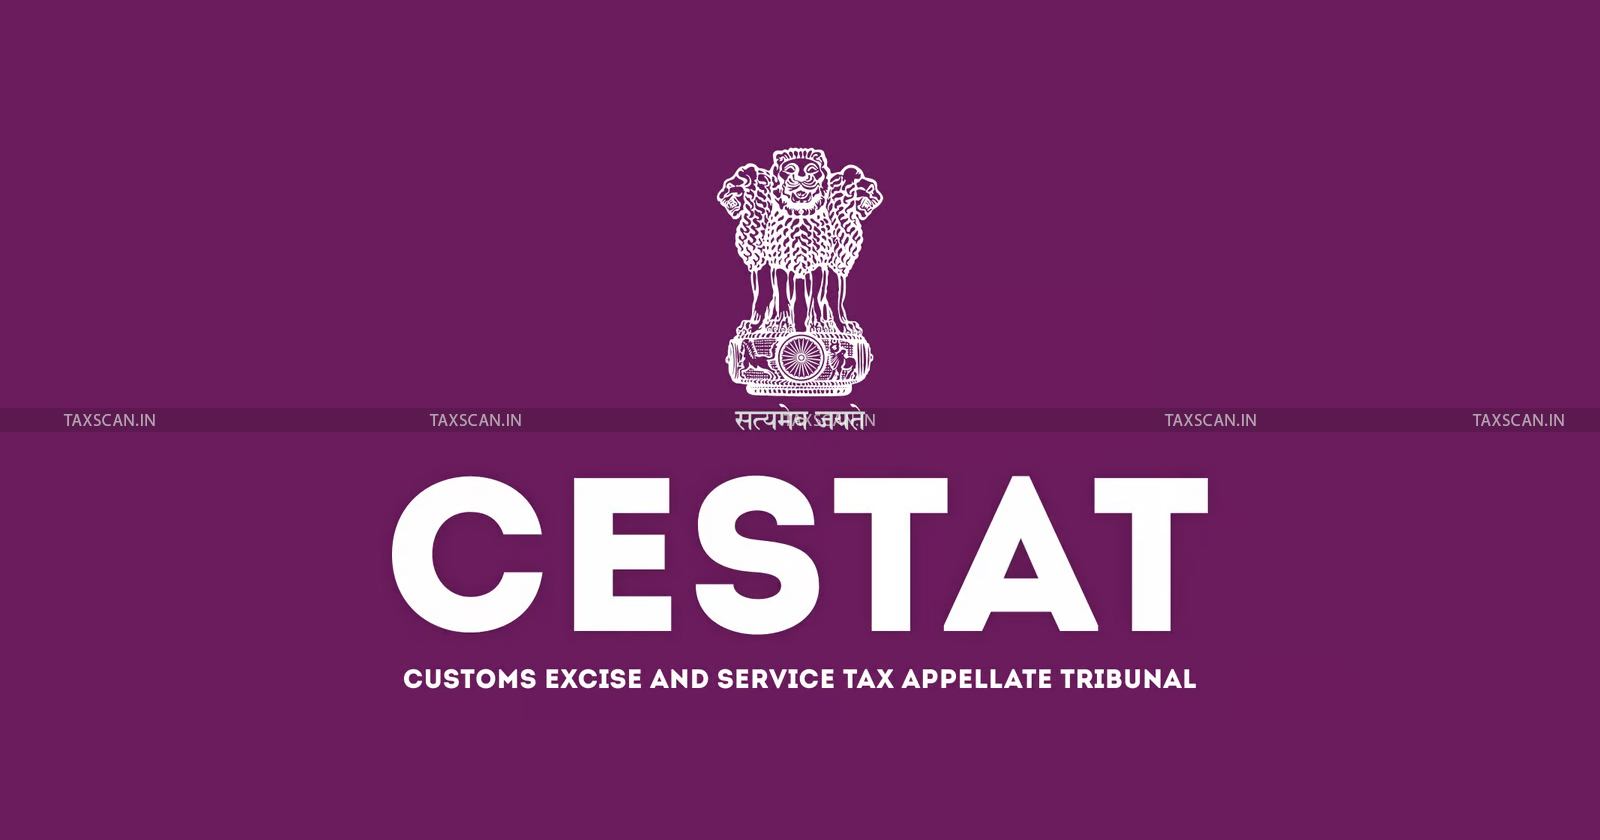 allege Clandestine Removal - CESTAT upholds Penalty - Central Excise Rules - Clandestine Removal - upholds Penalty - CESTAT - CESTAT News - Excise - Customs - Service Tax -Tax News - TAXSCAN